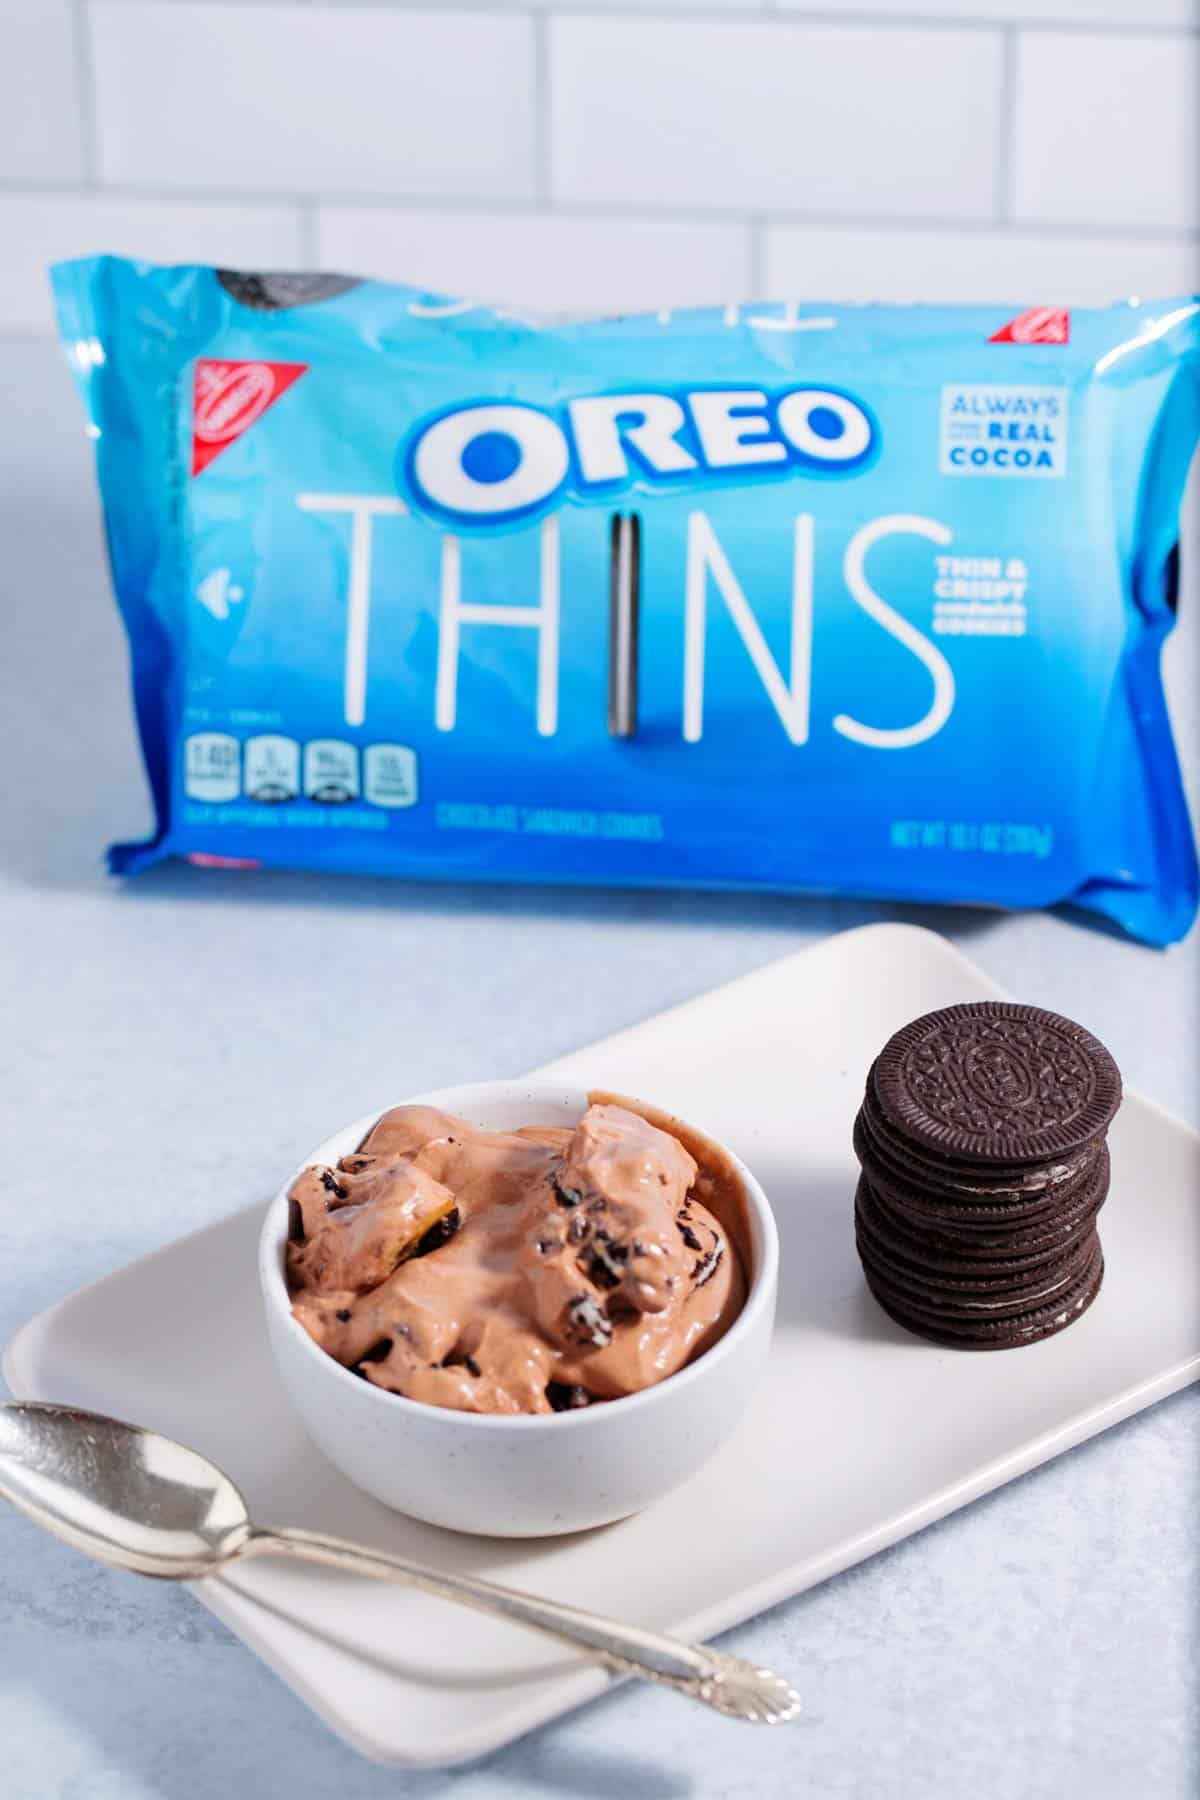 A bowl of chocolate banana pudding made with Oreo thins with a package of Oreos in the background.